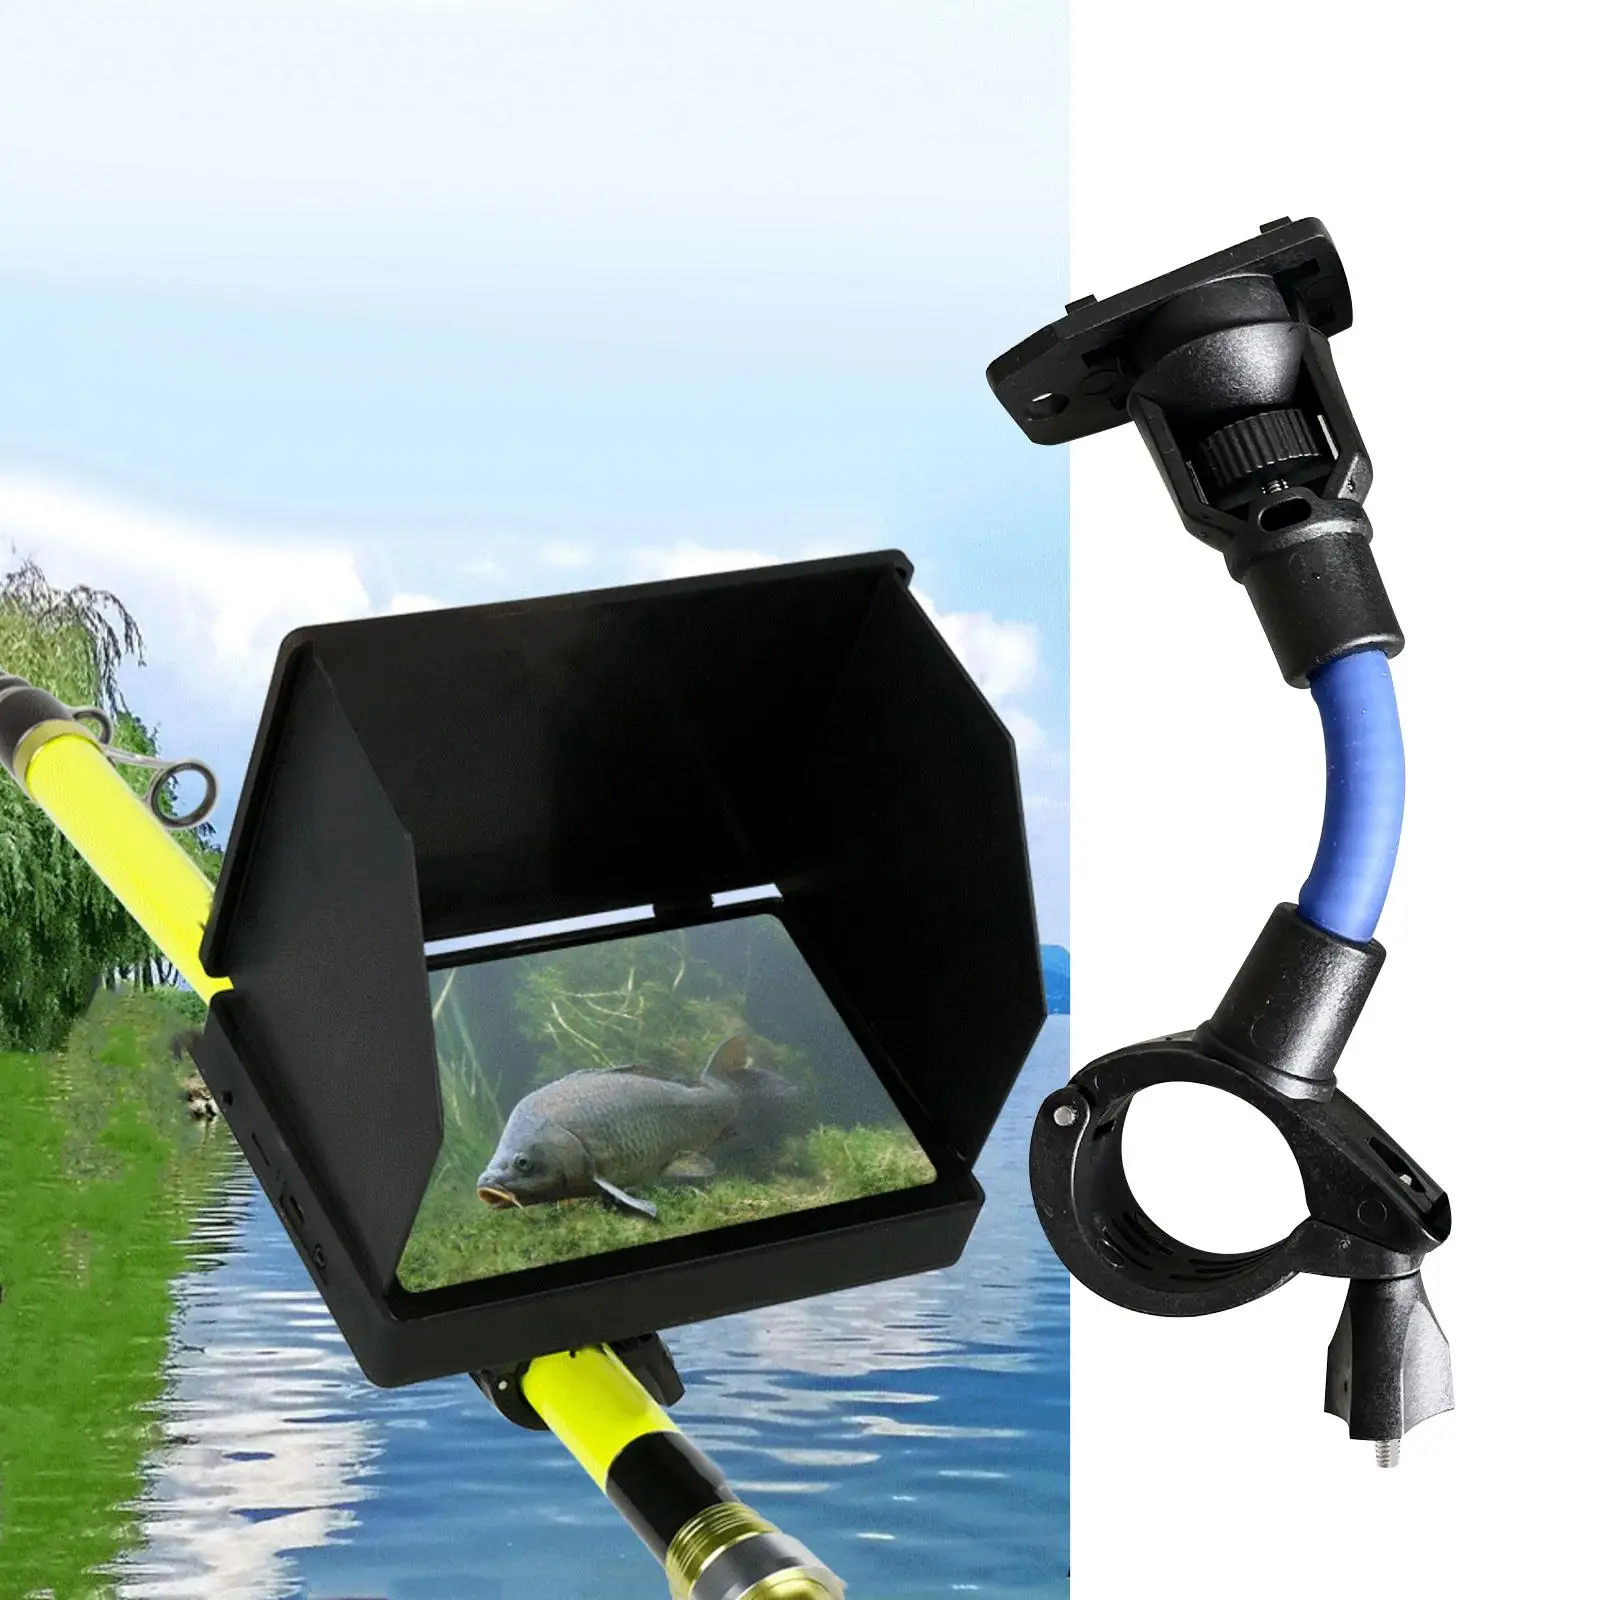 Fish Finders Clamp Mount for Fishing Pole 360 Adjustable Underwater Fishing Camera Holder for Electronic Mount Fish Finders